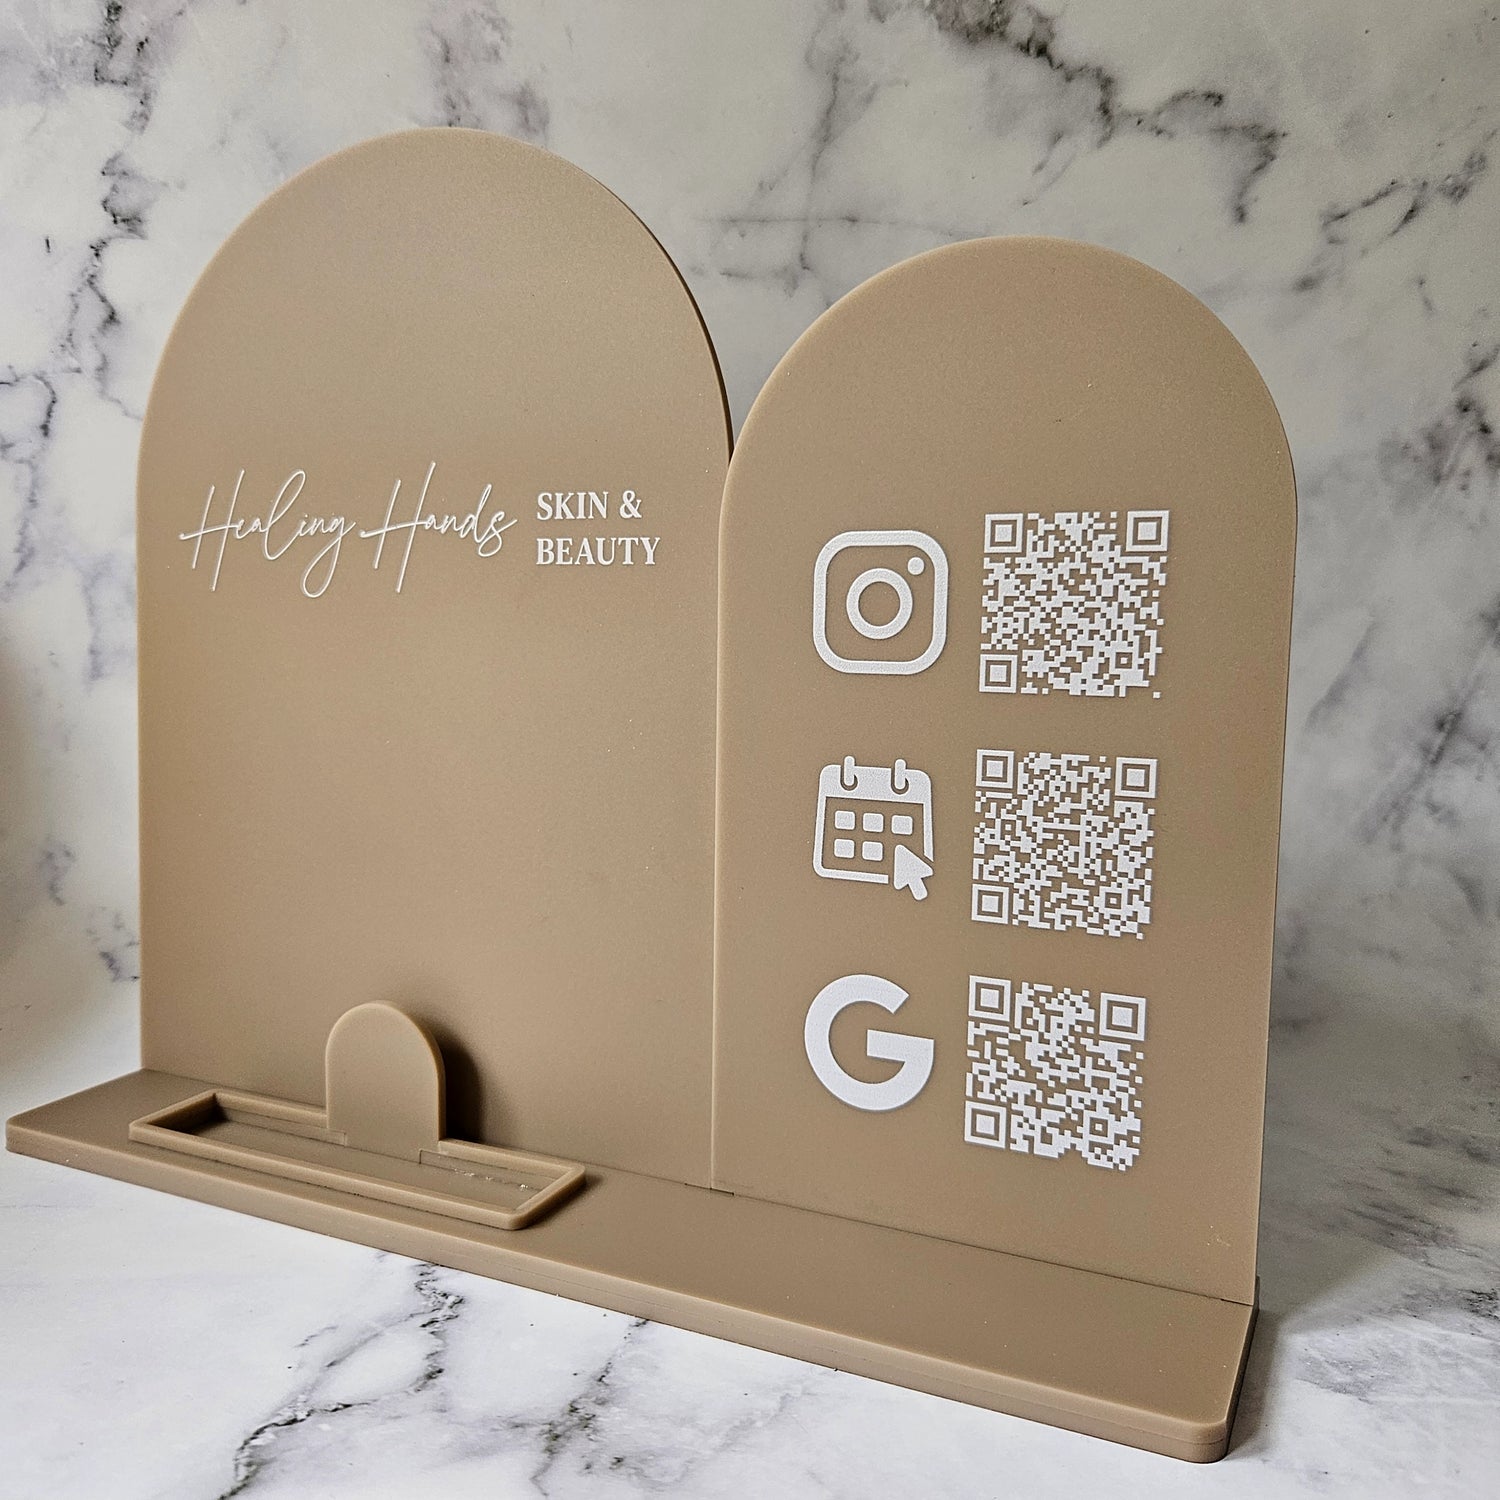 Double Arch Multi QR Code Sign with Logo and White Writing, Business Card Holder, Mocha Acrylic with White Writing